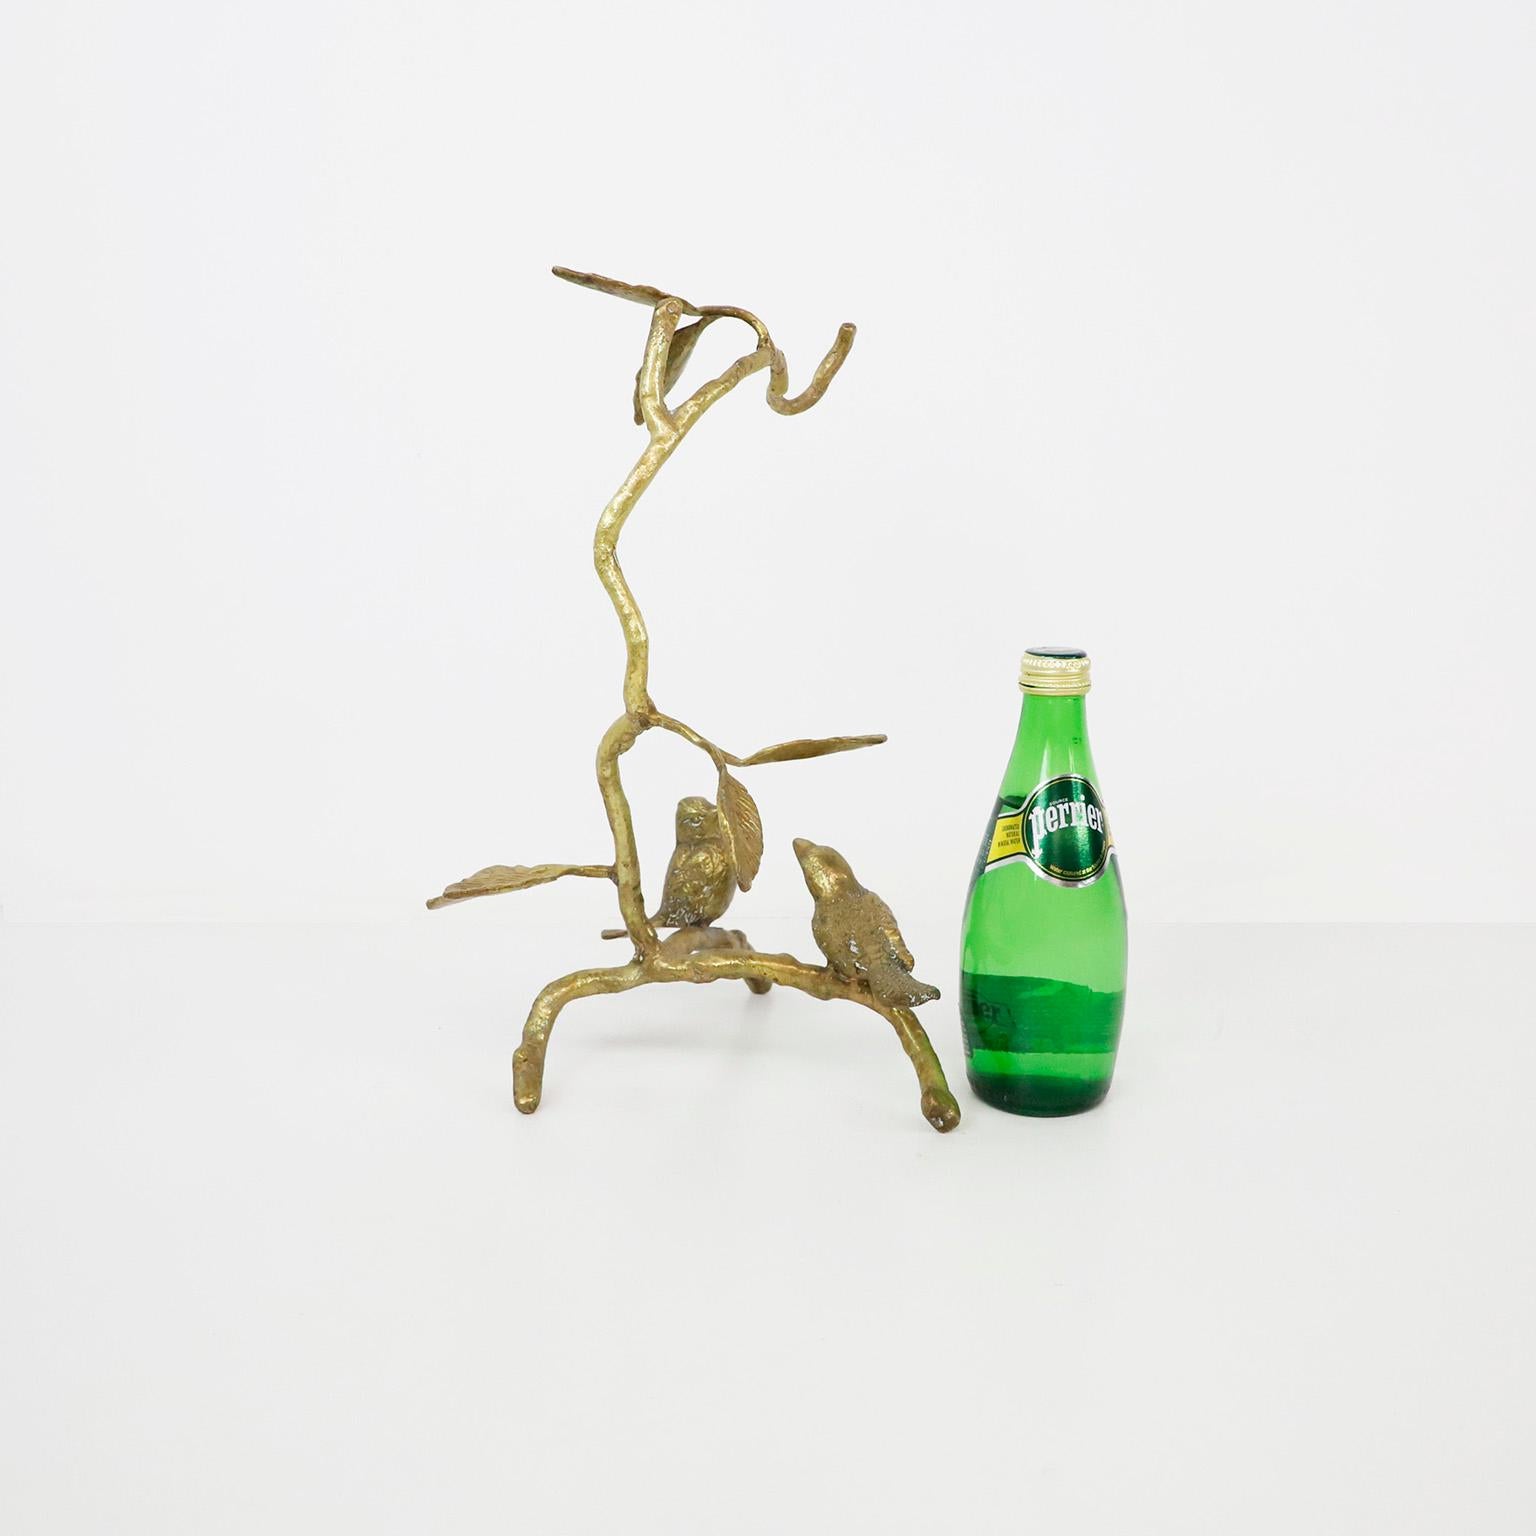 Mexican Brass Sculpture in the Manner of Diego Giacometti